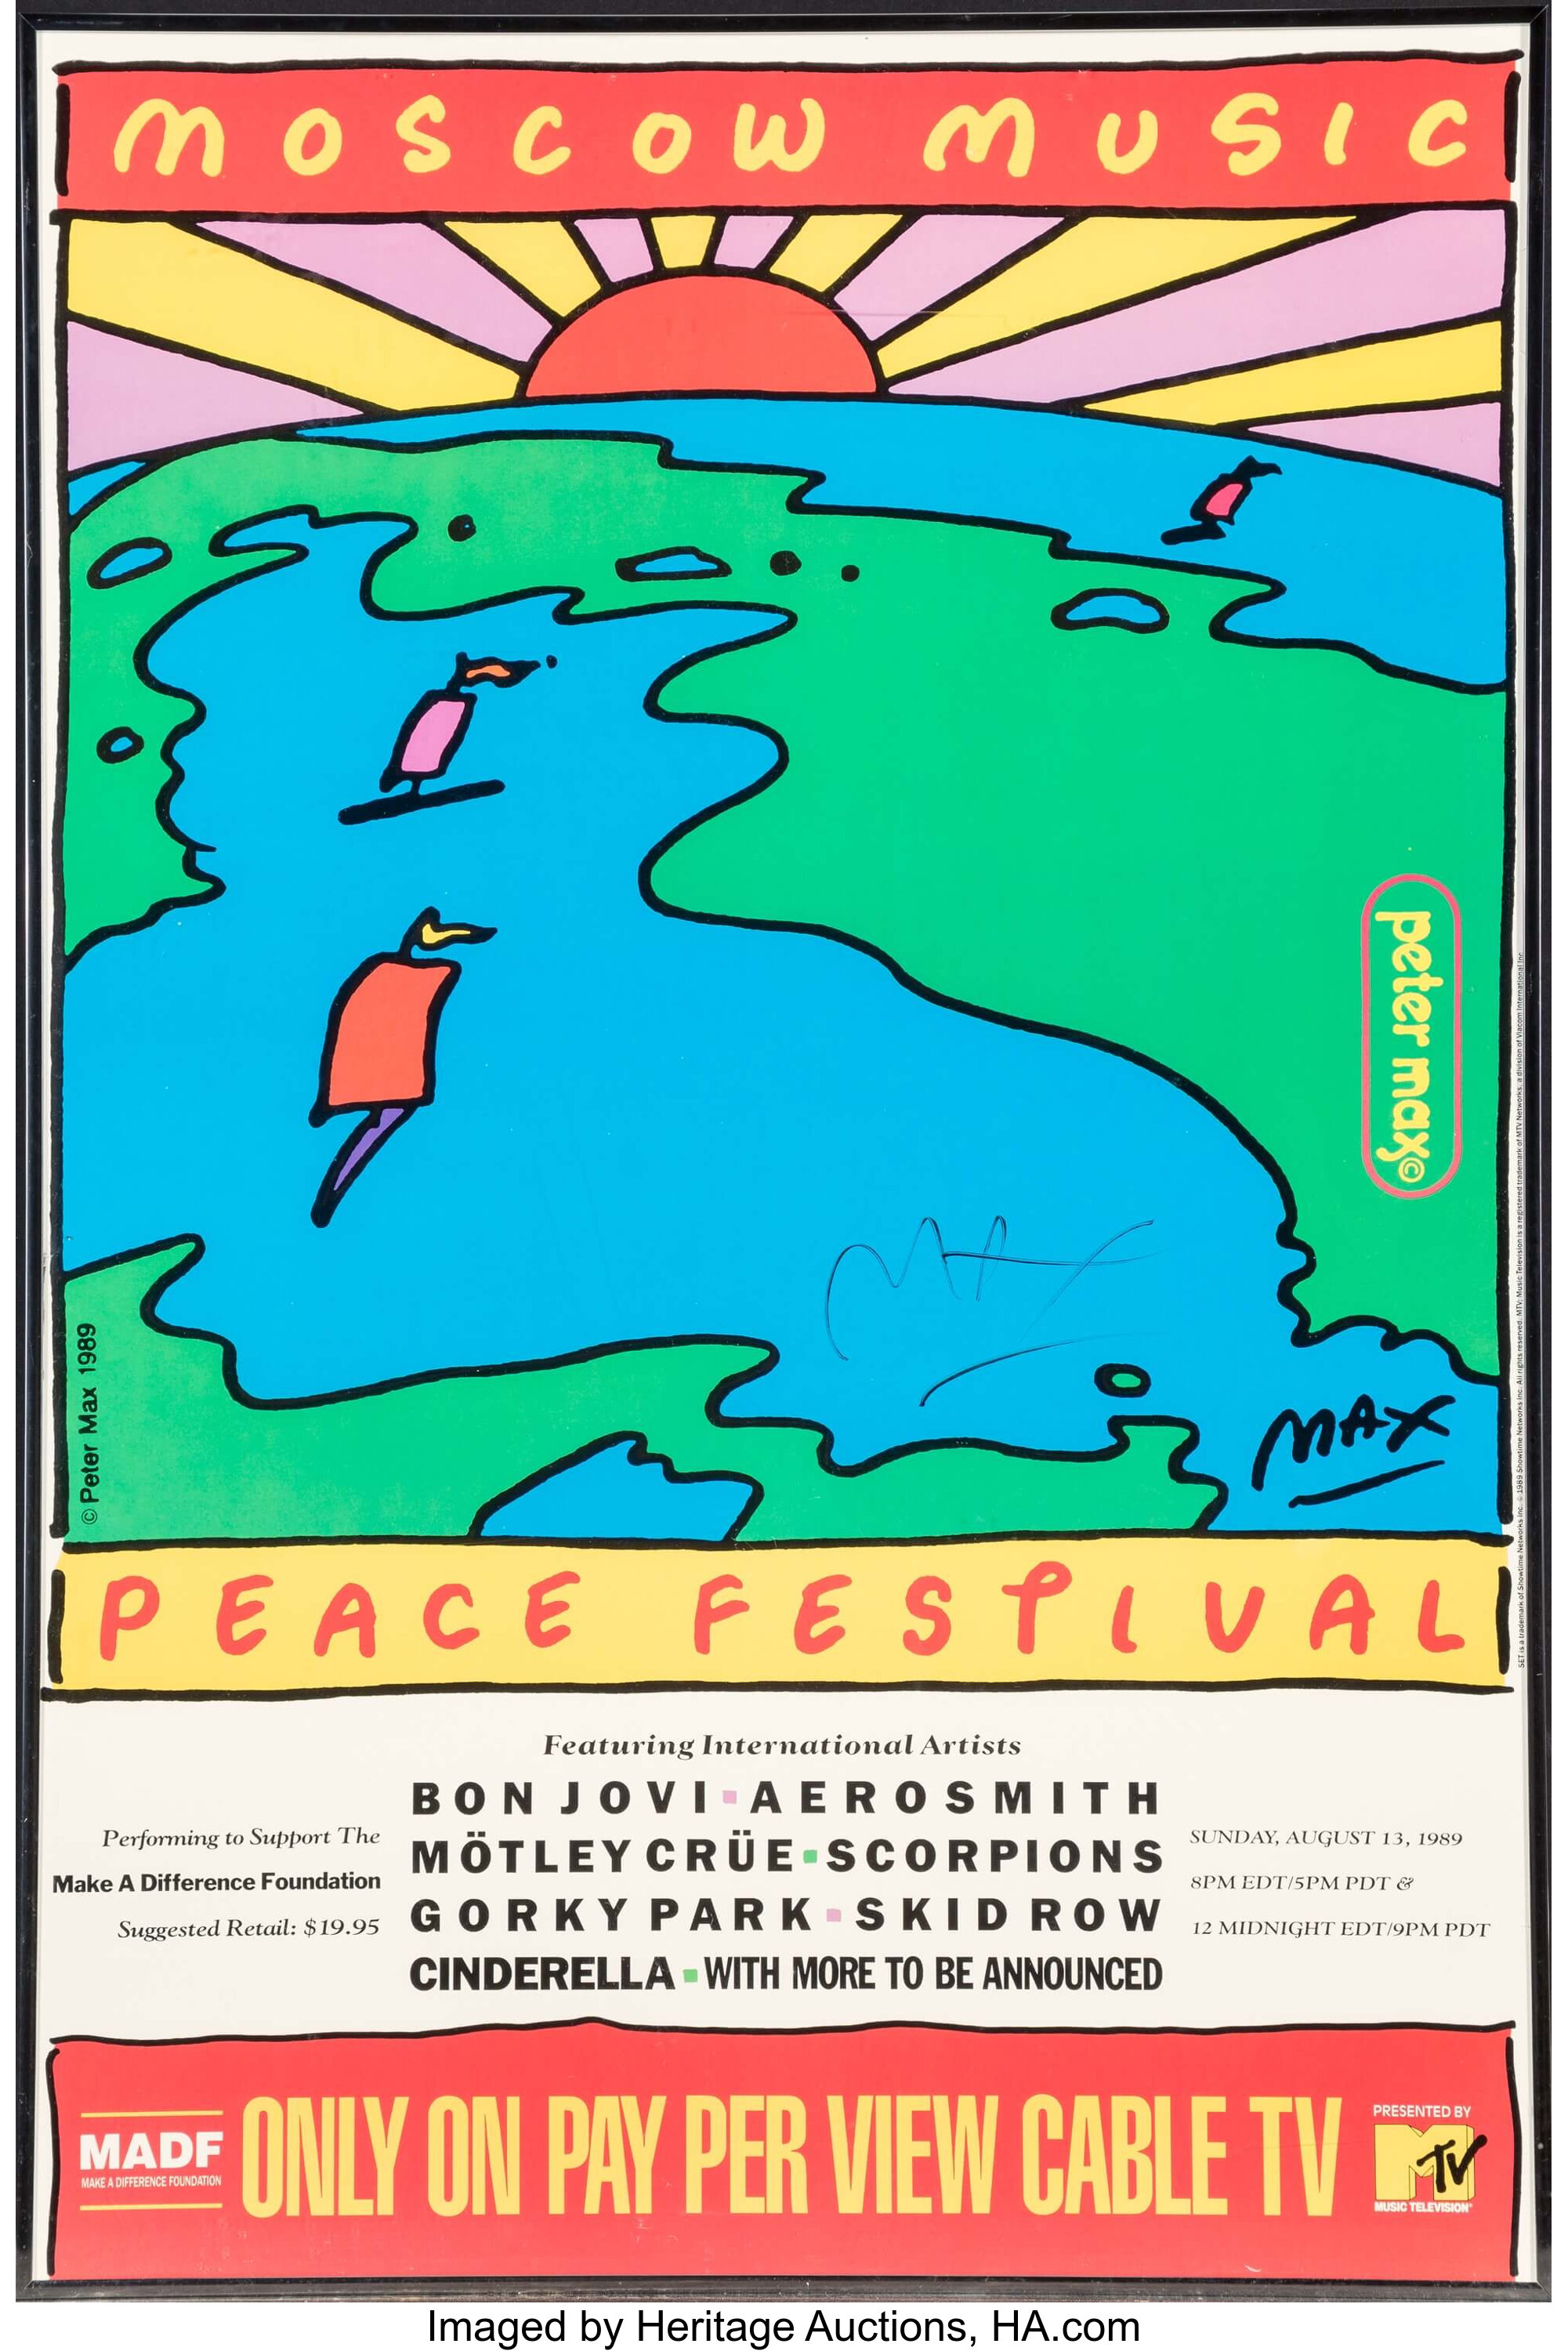 Peter Max (American, b. 1937). Moscow Music Peace Festival poster, | Lot  #11095 | Heritage Auctions